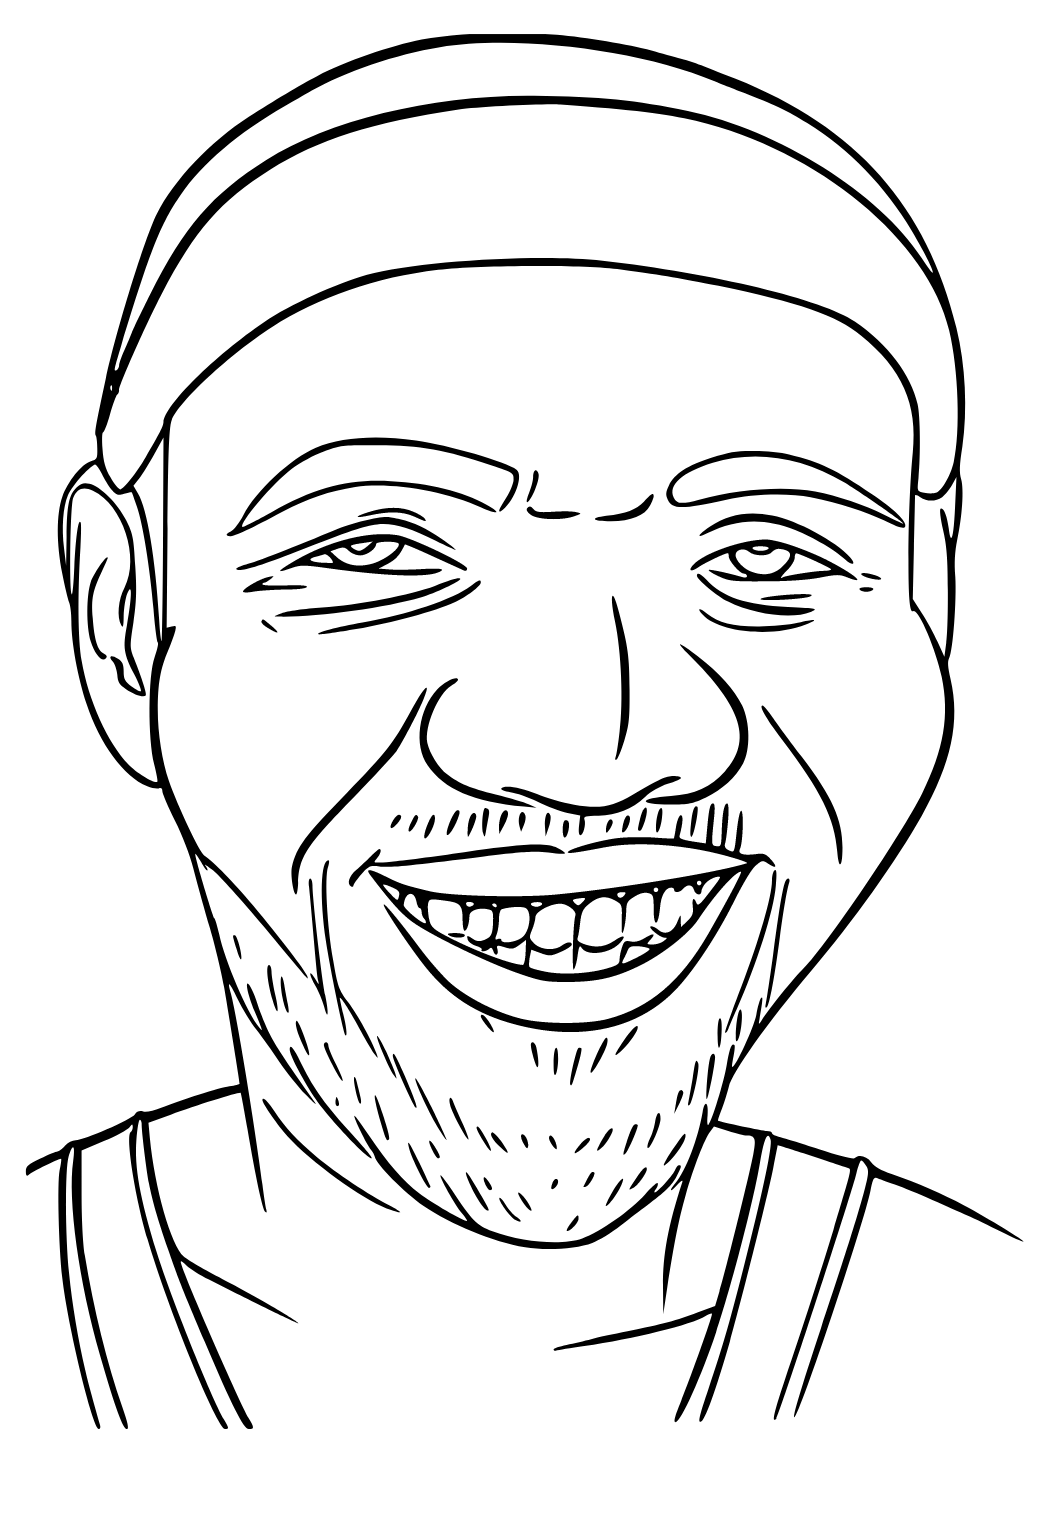 Free printable lebron james funny coloring page for adults and kids